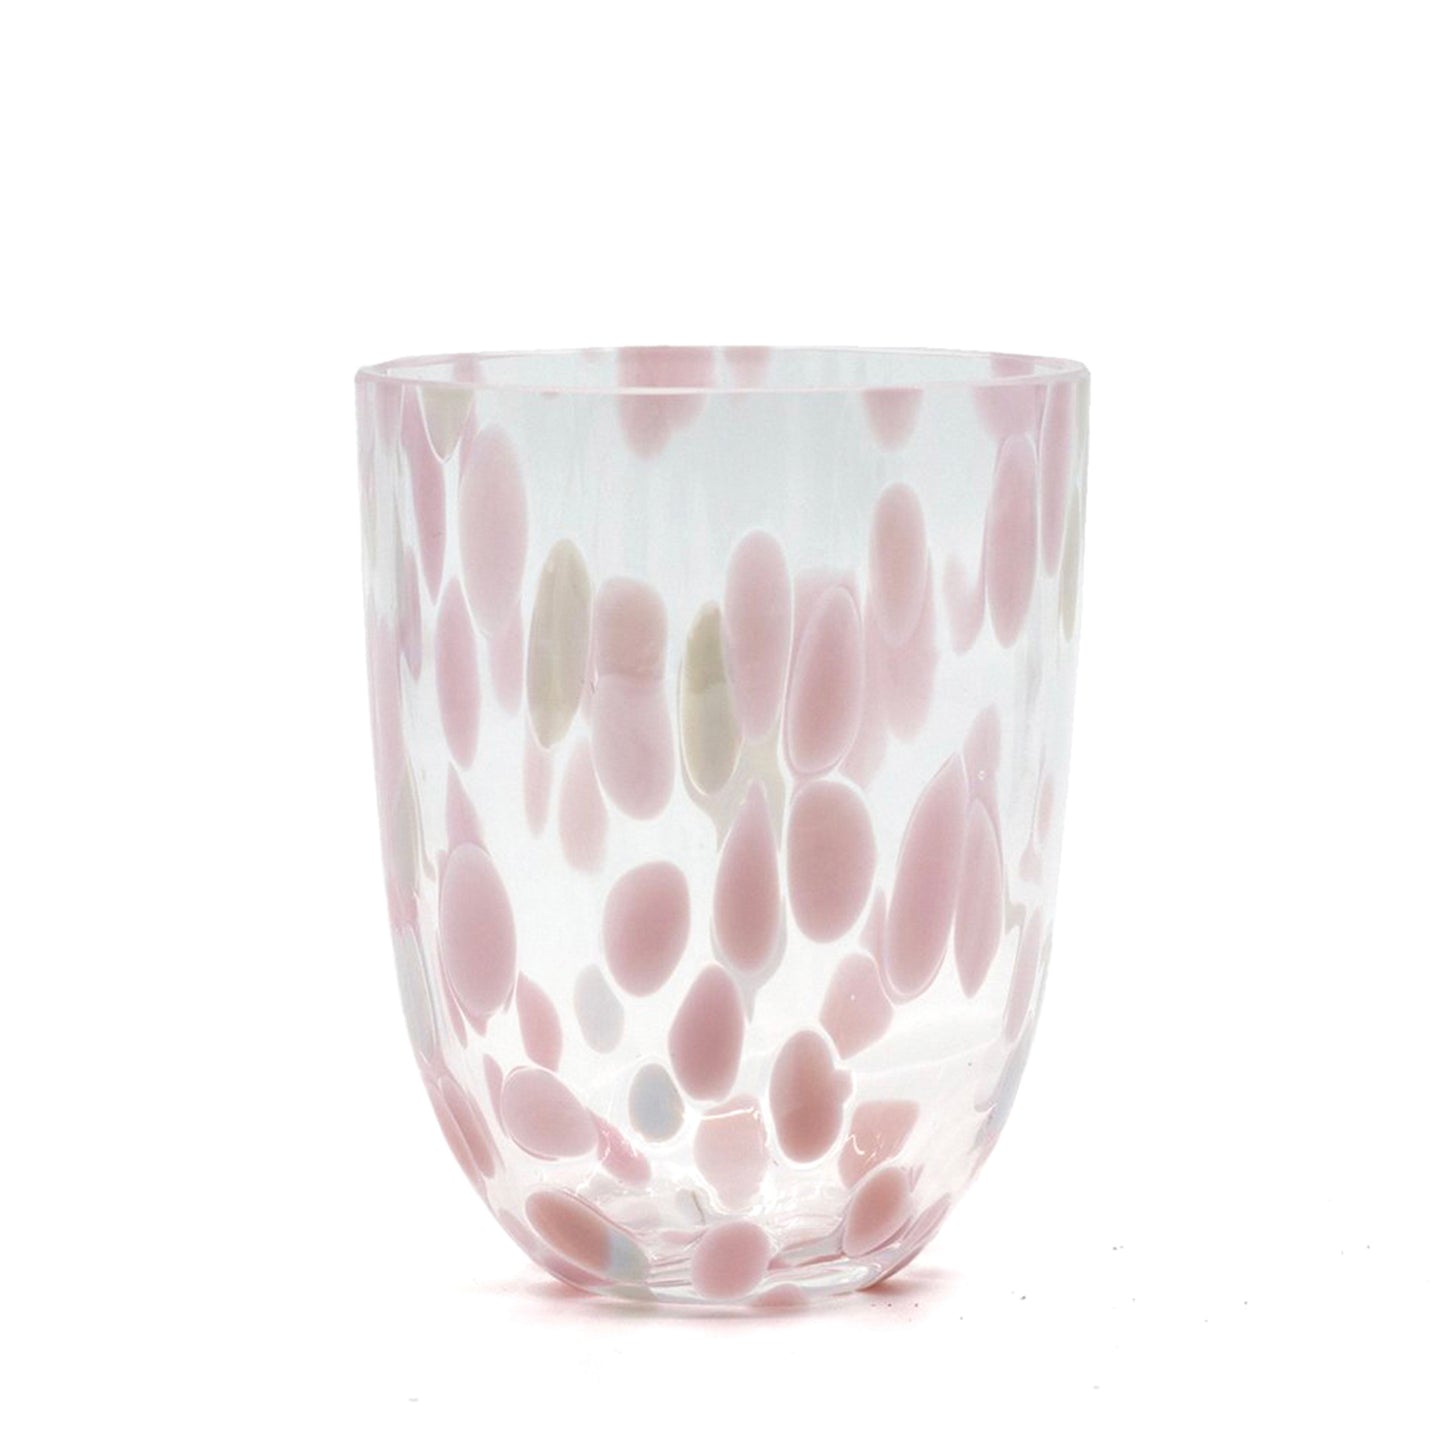 CONFETTI GLASS TUMBLER. PALE LILAC AND PINK